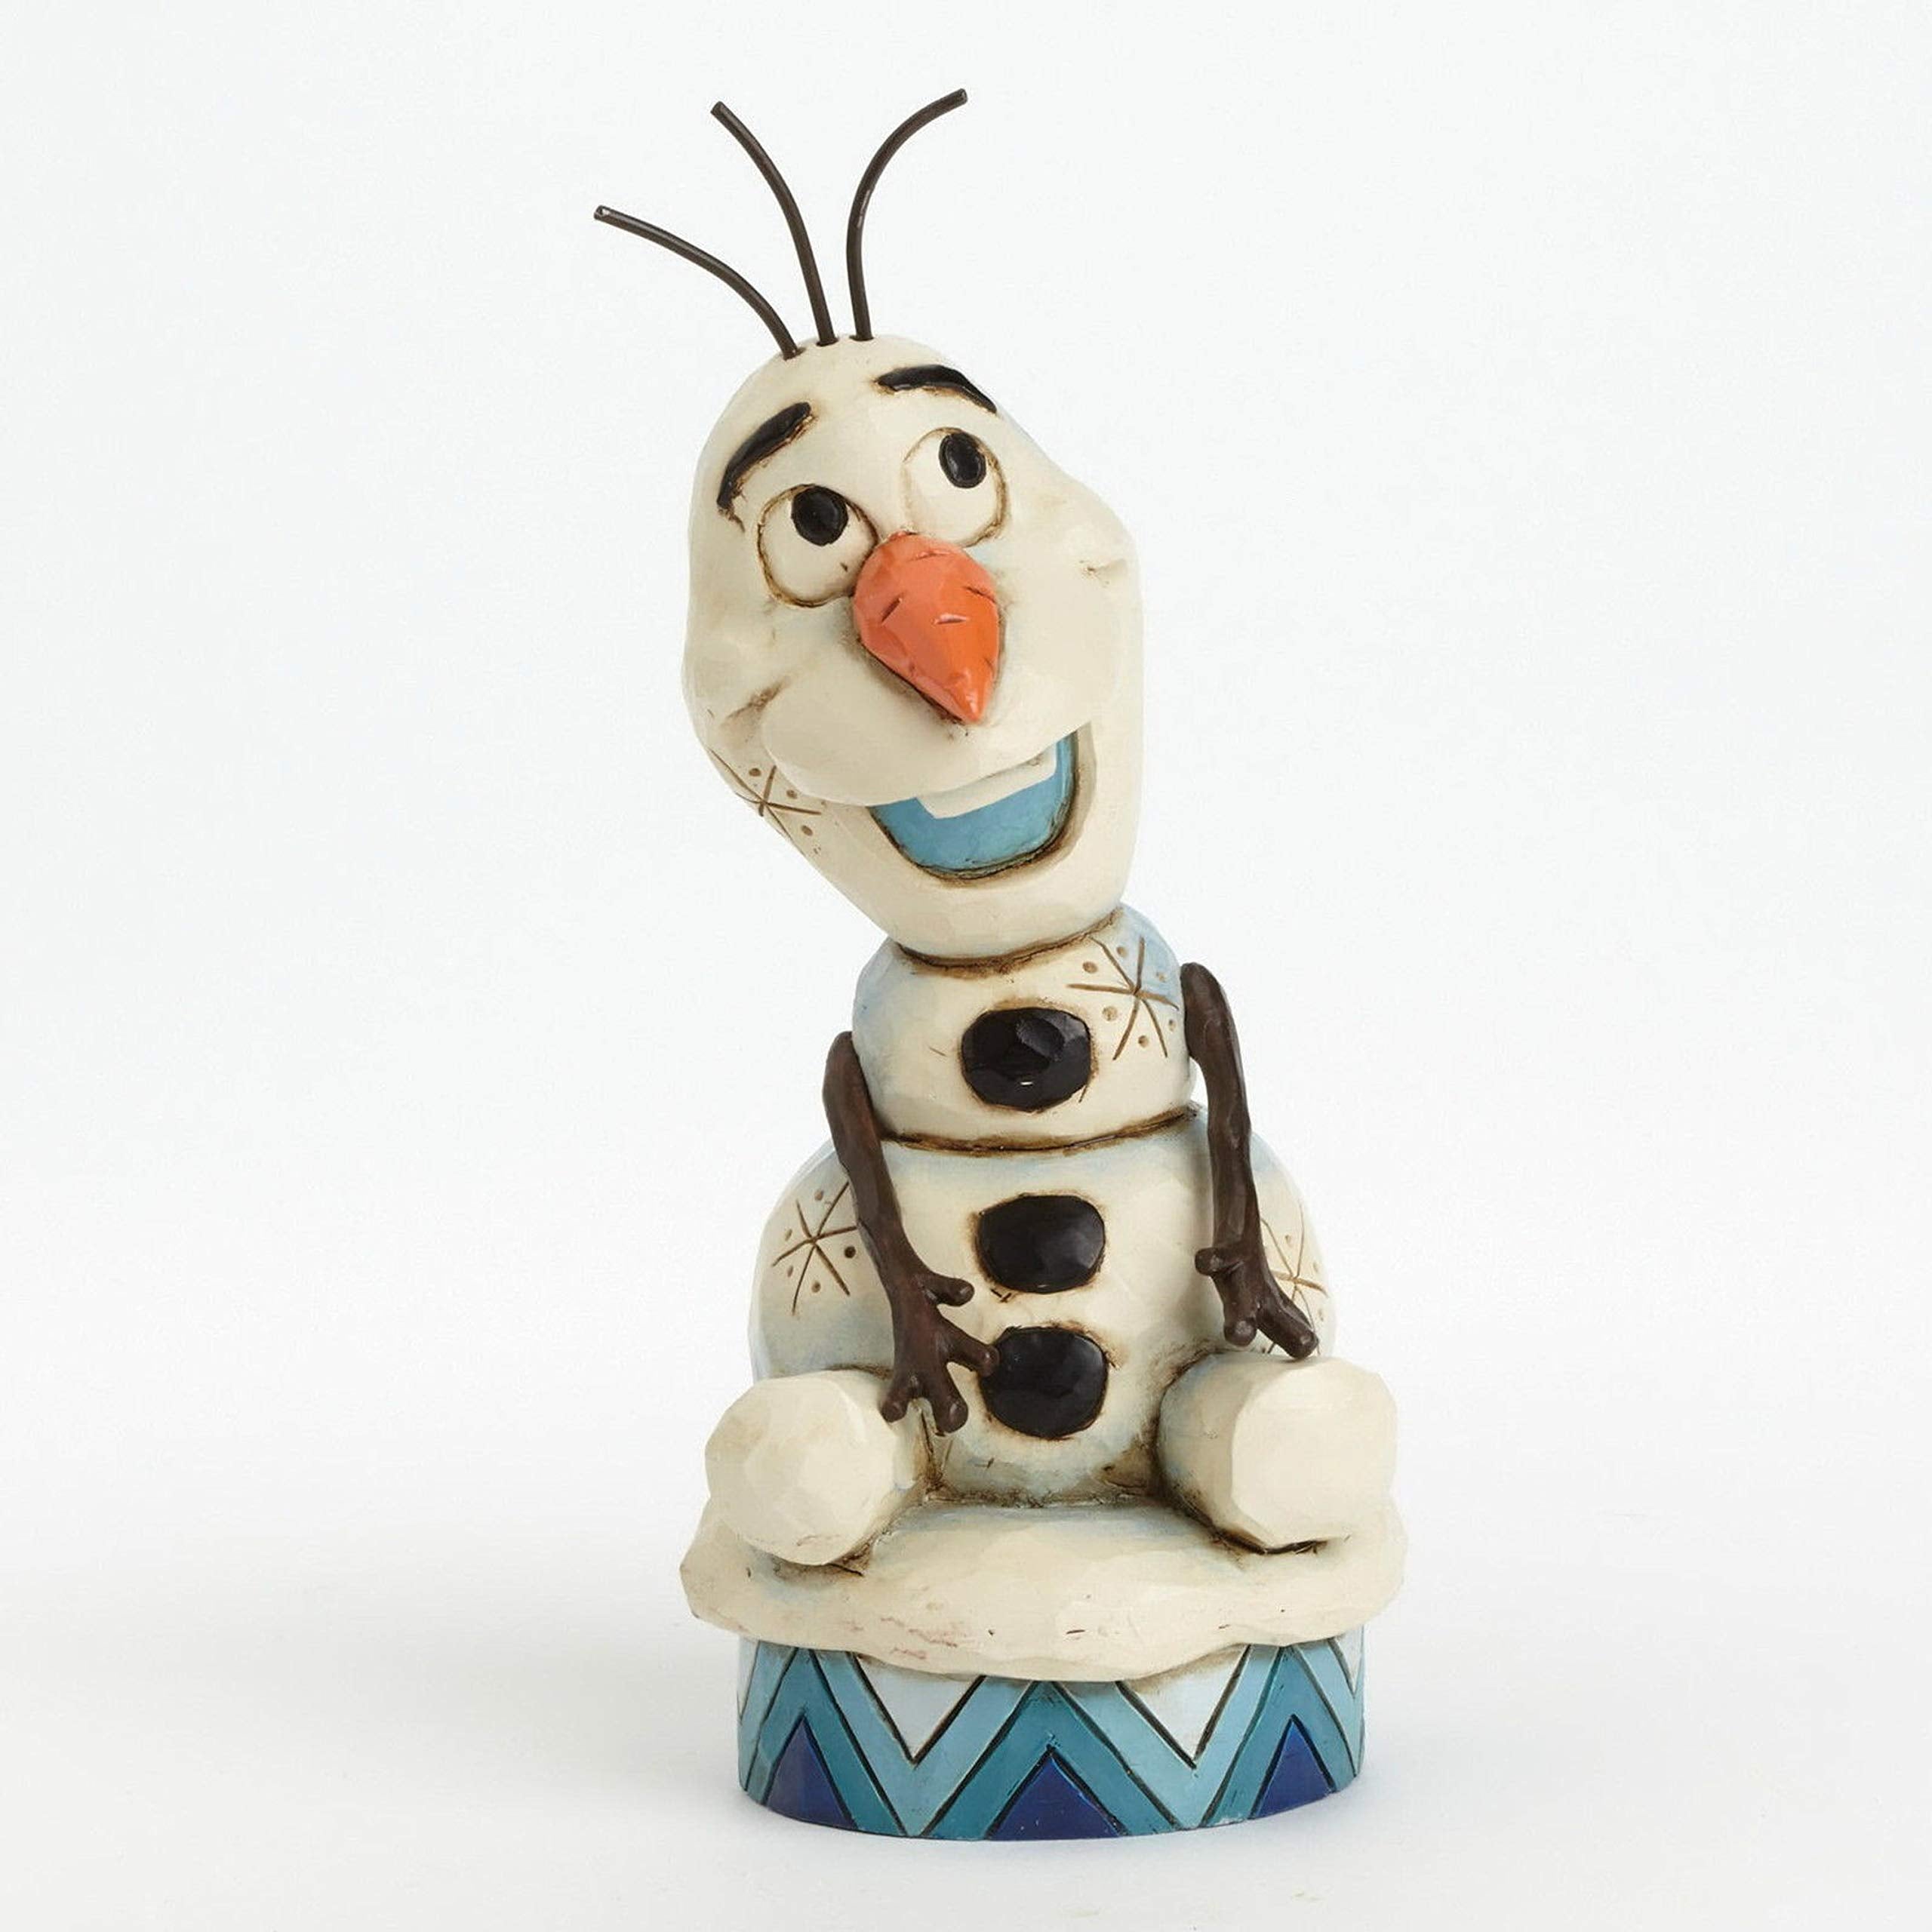 Jim Shore Disney Traditions Olaf from Frozen Figurine, 5.1"